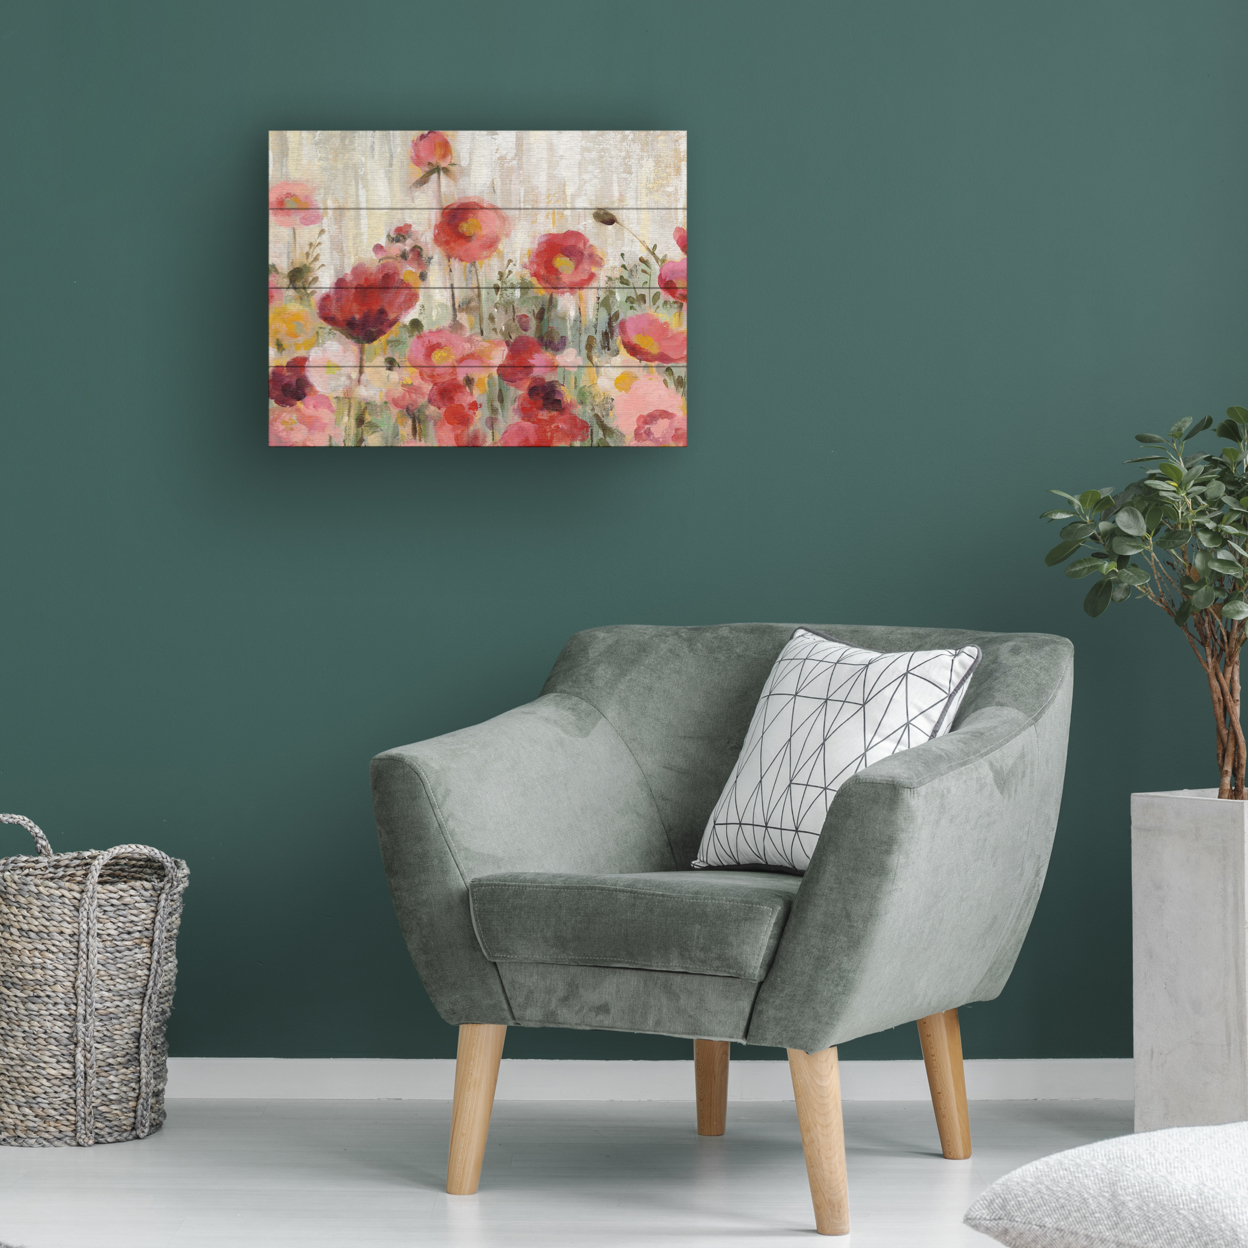 Wall Art 12 X 16 Inches Titled Sprinkled Flowers Crop Ready To Hang Printed On Wooden Planks